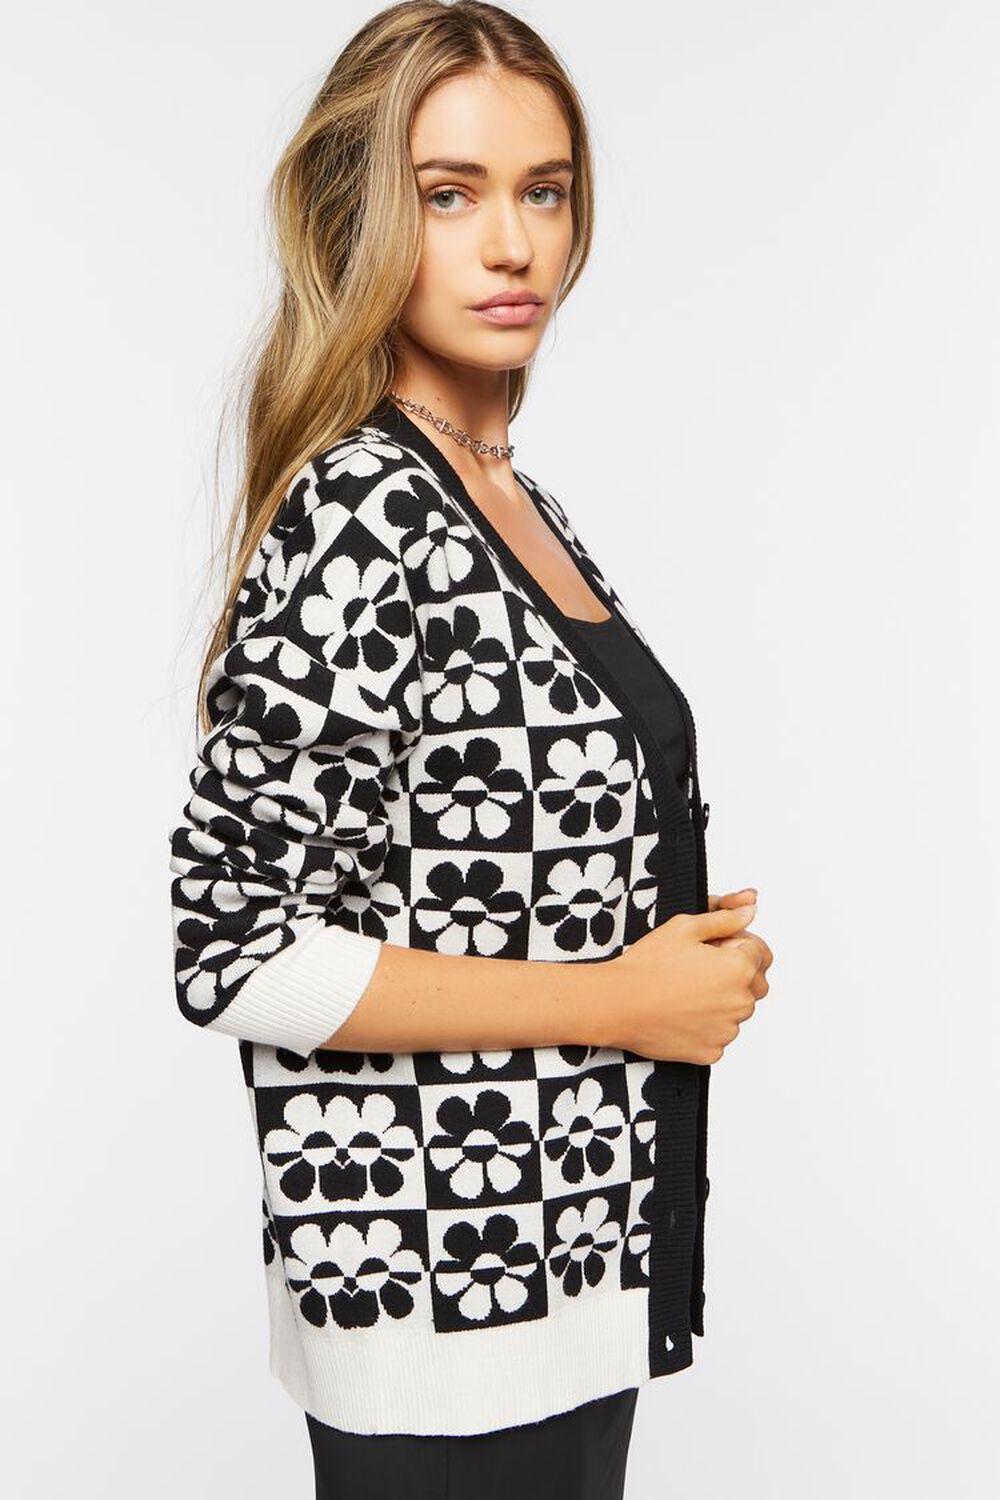 BLACK/WHITE Checkered Floral Cardigan Sweater, image 2